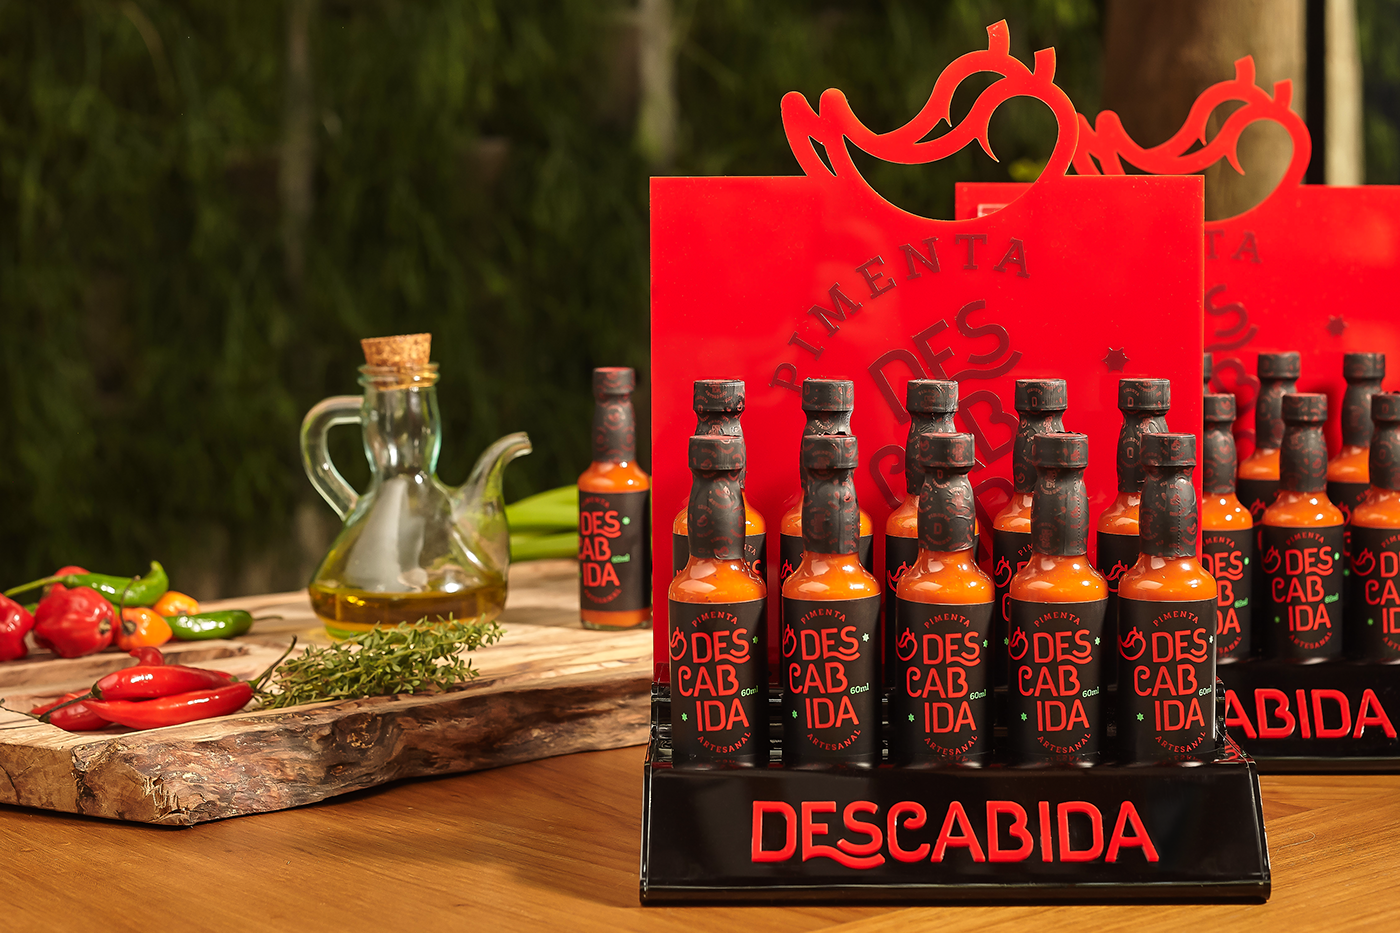 Pimenta descabida chili red pepper packing Display Food  sauce